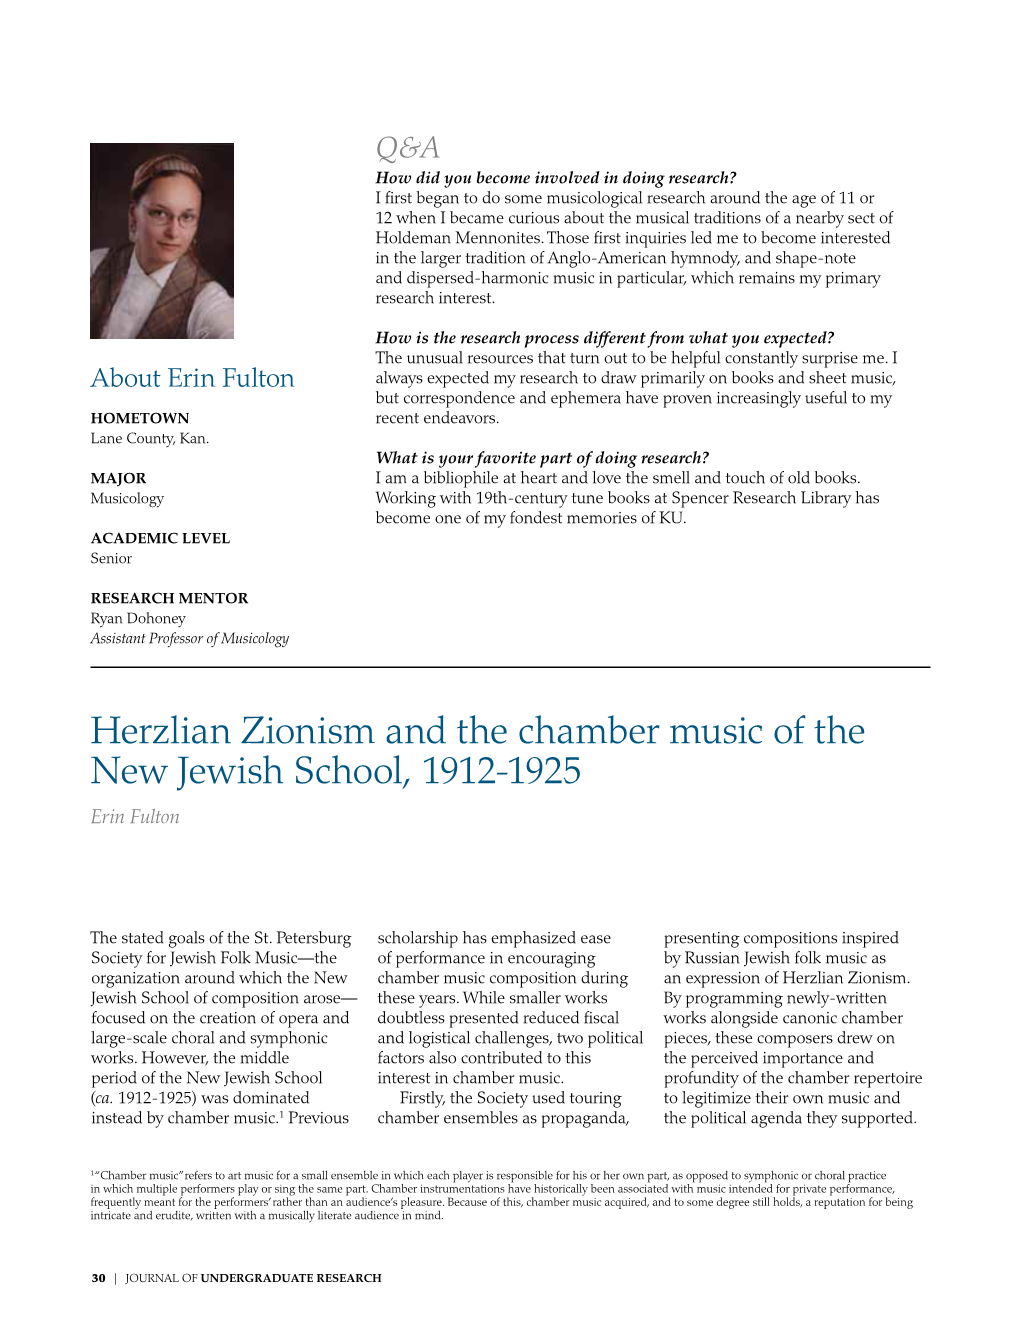 Herzlian Zionism and the Chamber Music of the New Jewish School, 1912-1925 Erin Fulton